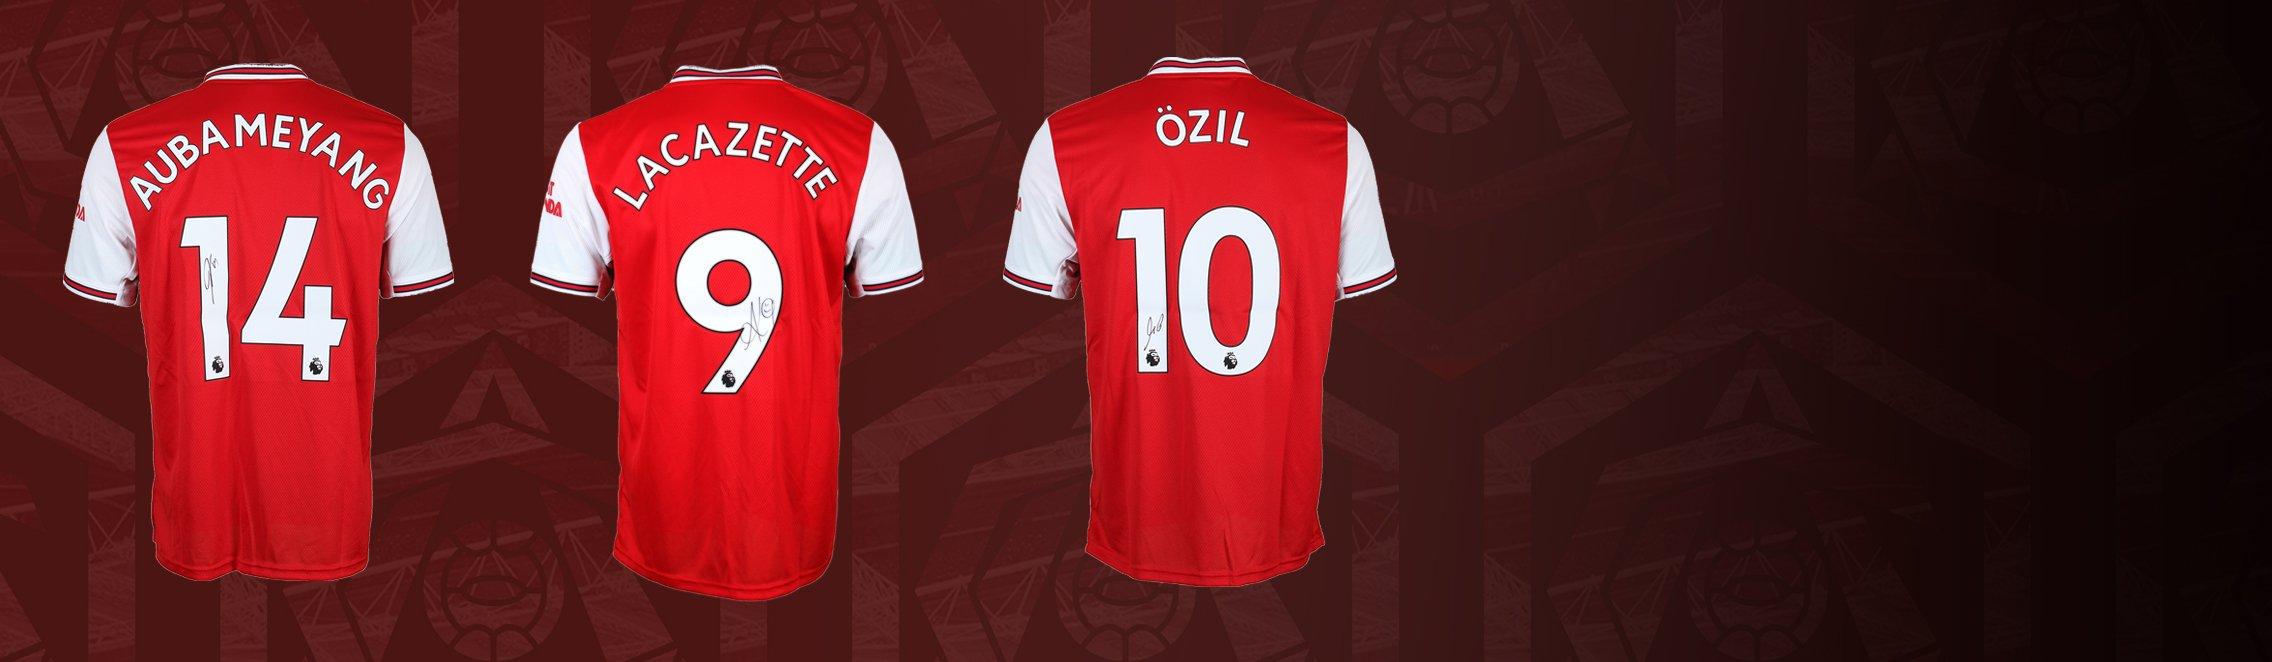 arsenal signed jersey